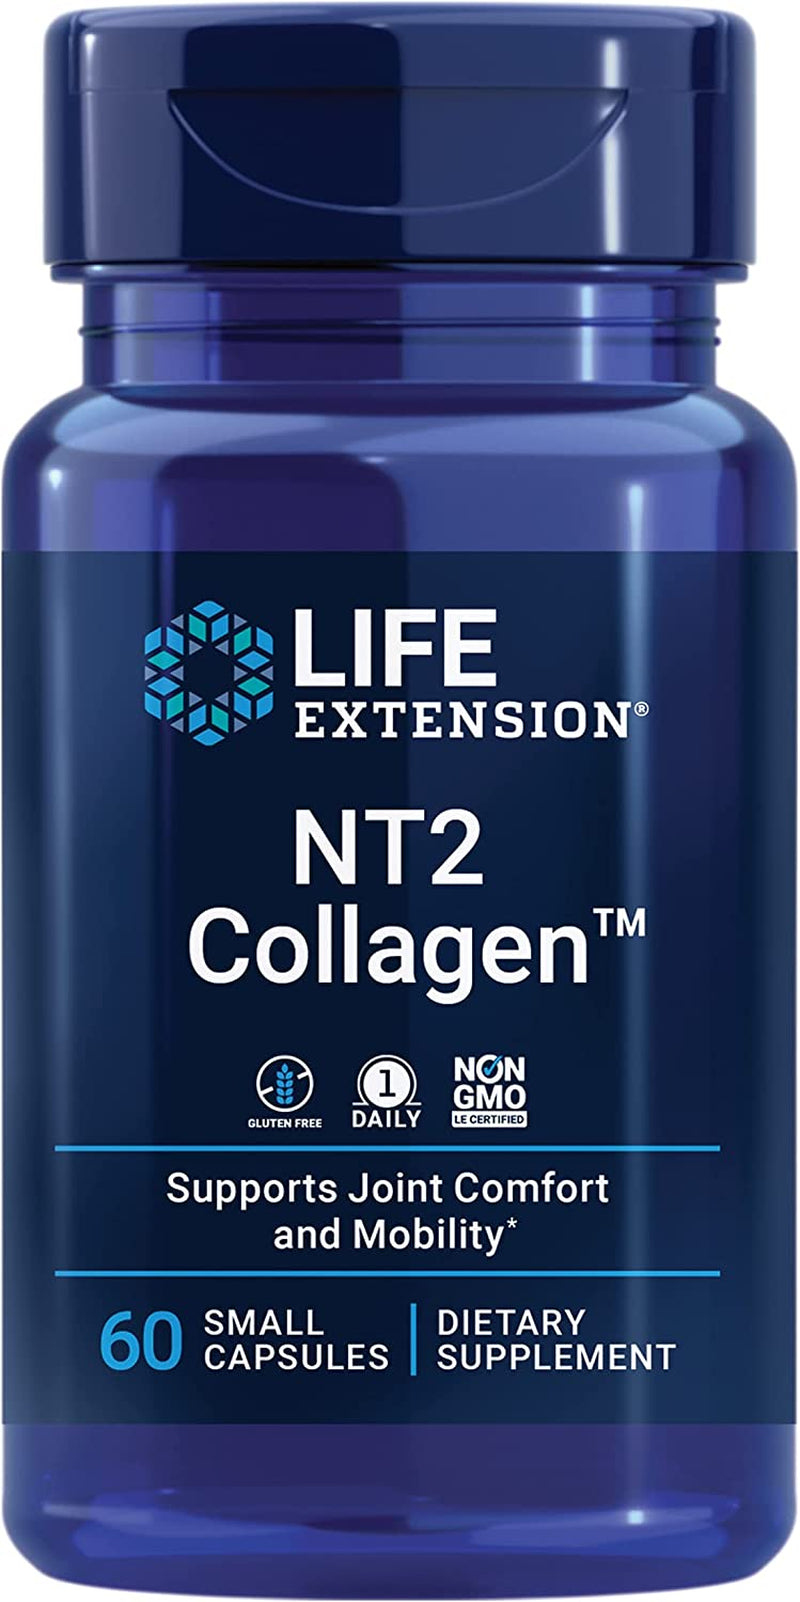 Life Extension NT2 Collagen - Undenatured Type II Collagen Supplement to Support Joint Mobility – Type 2 Collagen for Joints Cartilage Health - Non-Gmo, Gluten-Free, Once-Daily - 60 Small Capsules